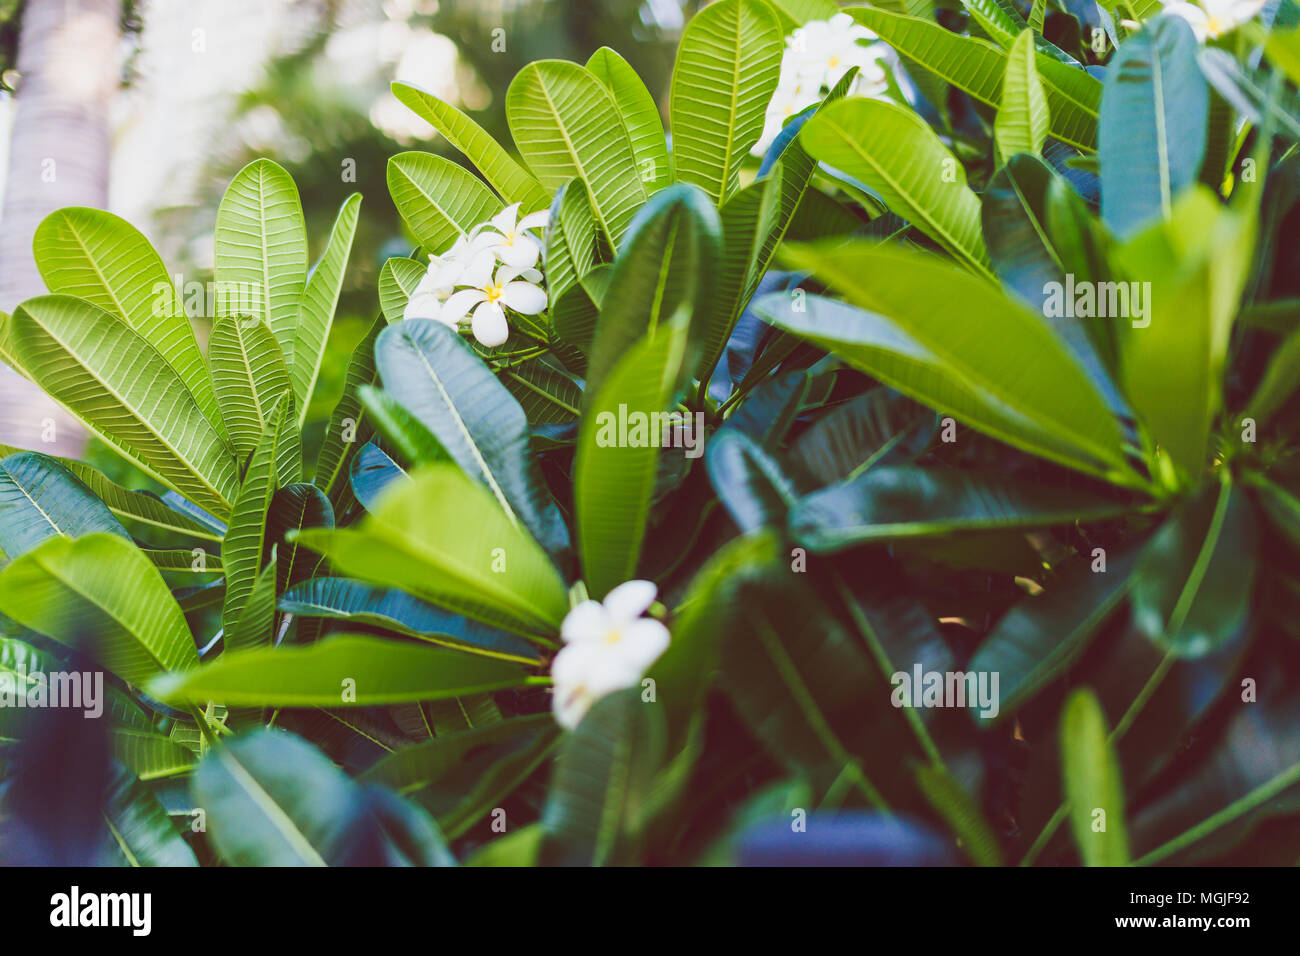 frangipani plants with vibrant colors and flowers in subtropical climate, shot in Queensland Australia Stock Photo